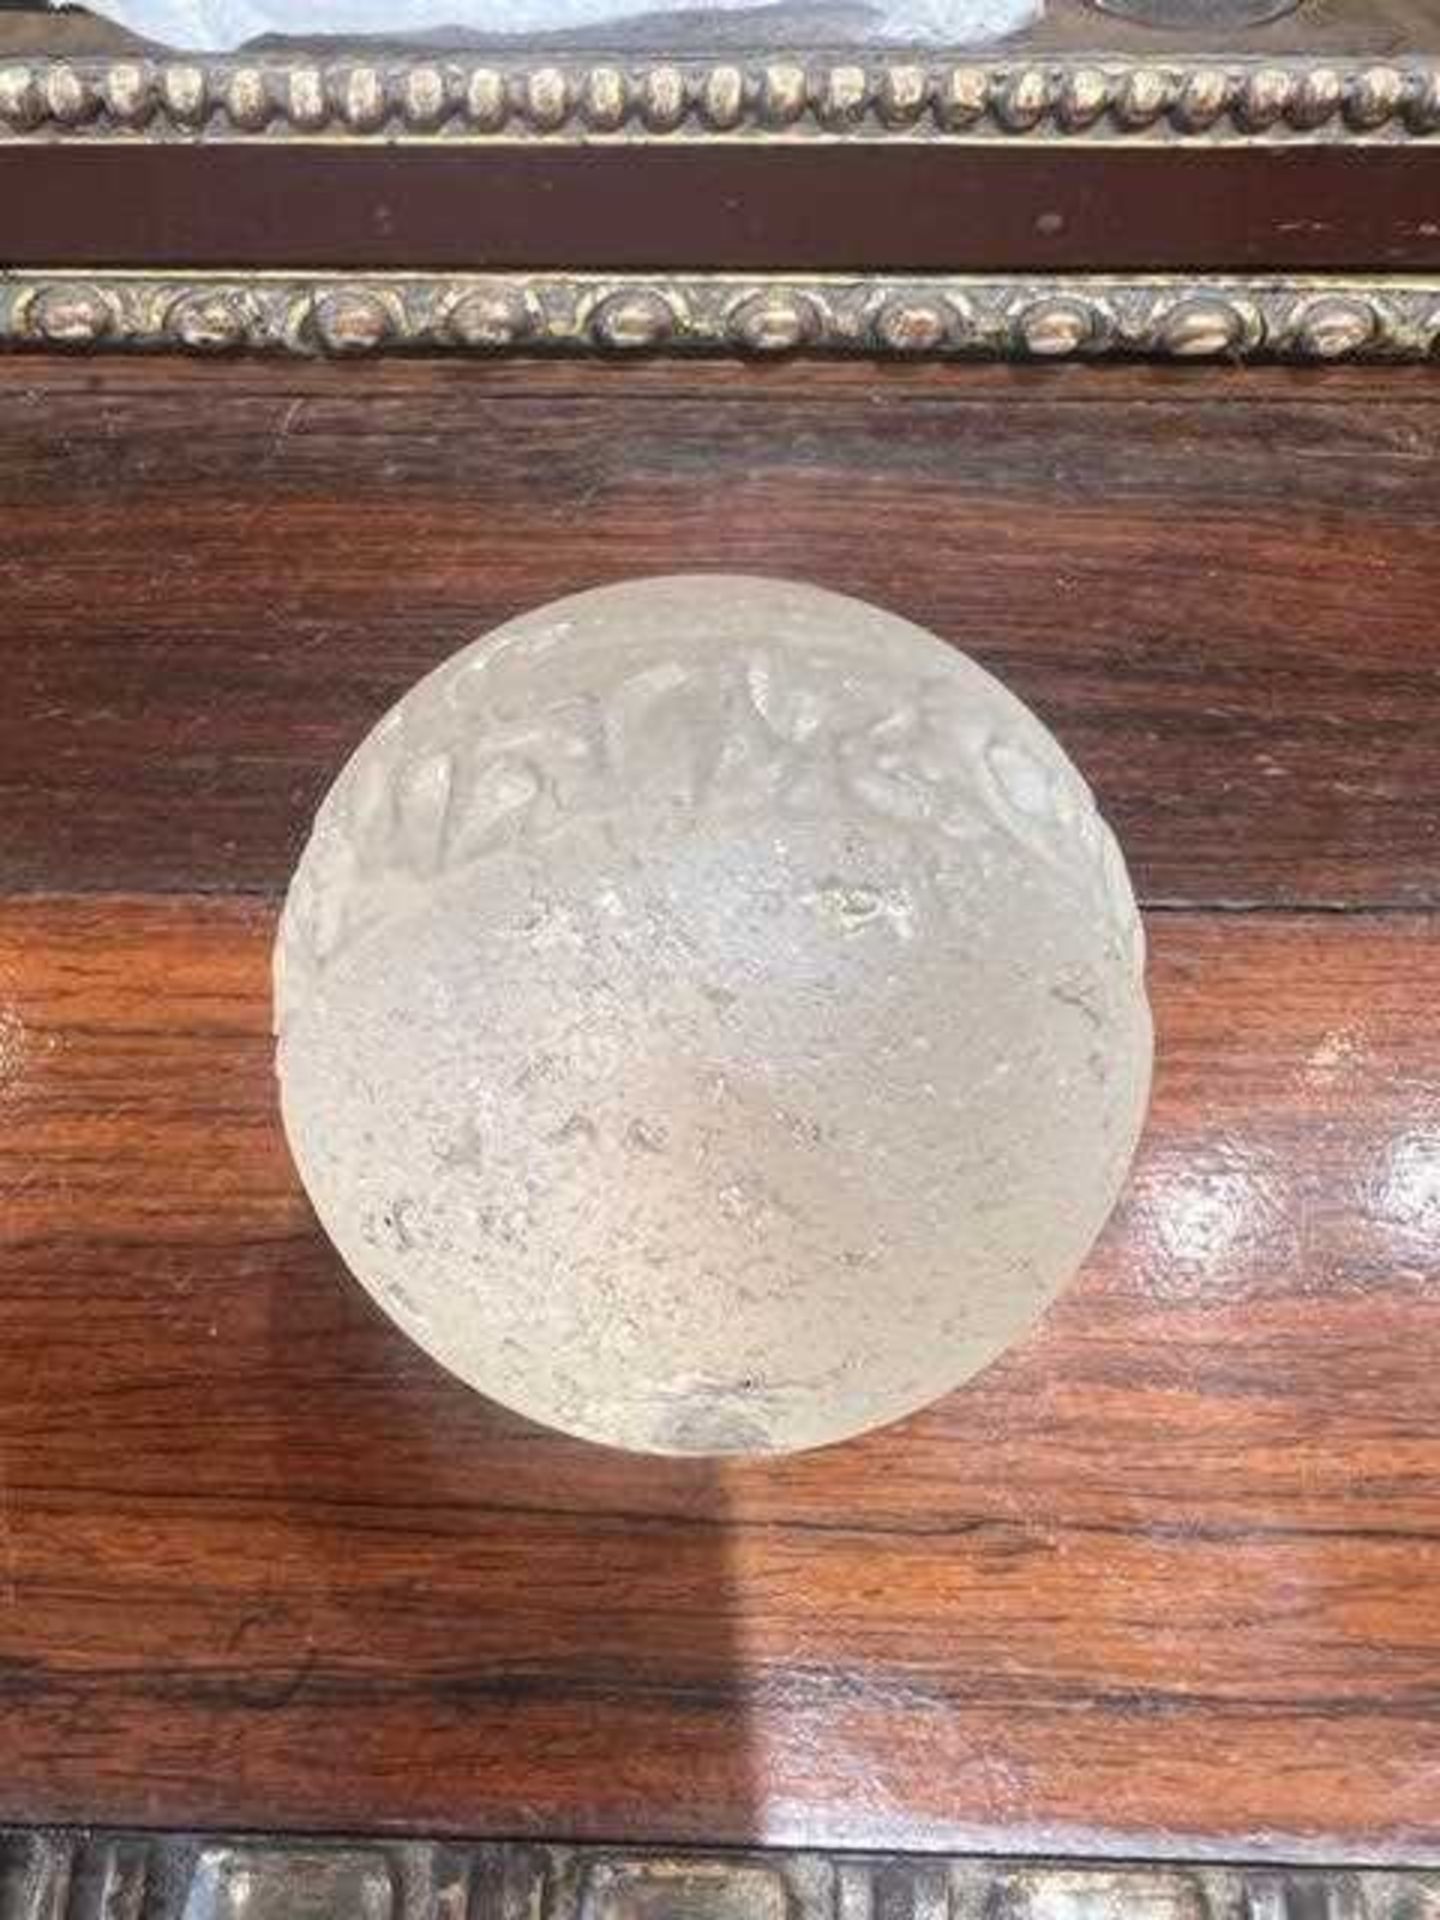 AN ISLAMIC SOLID GLASS SPHERE - Image 12 of 15